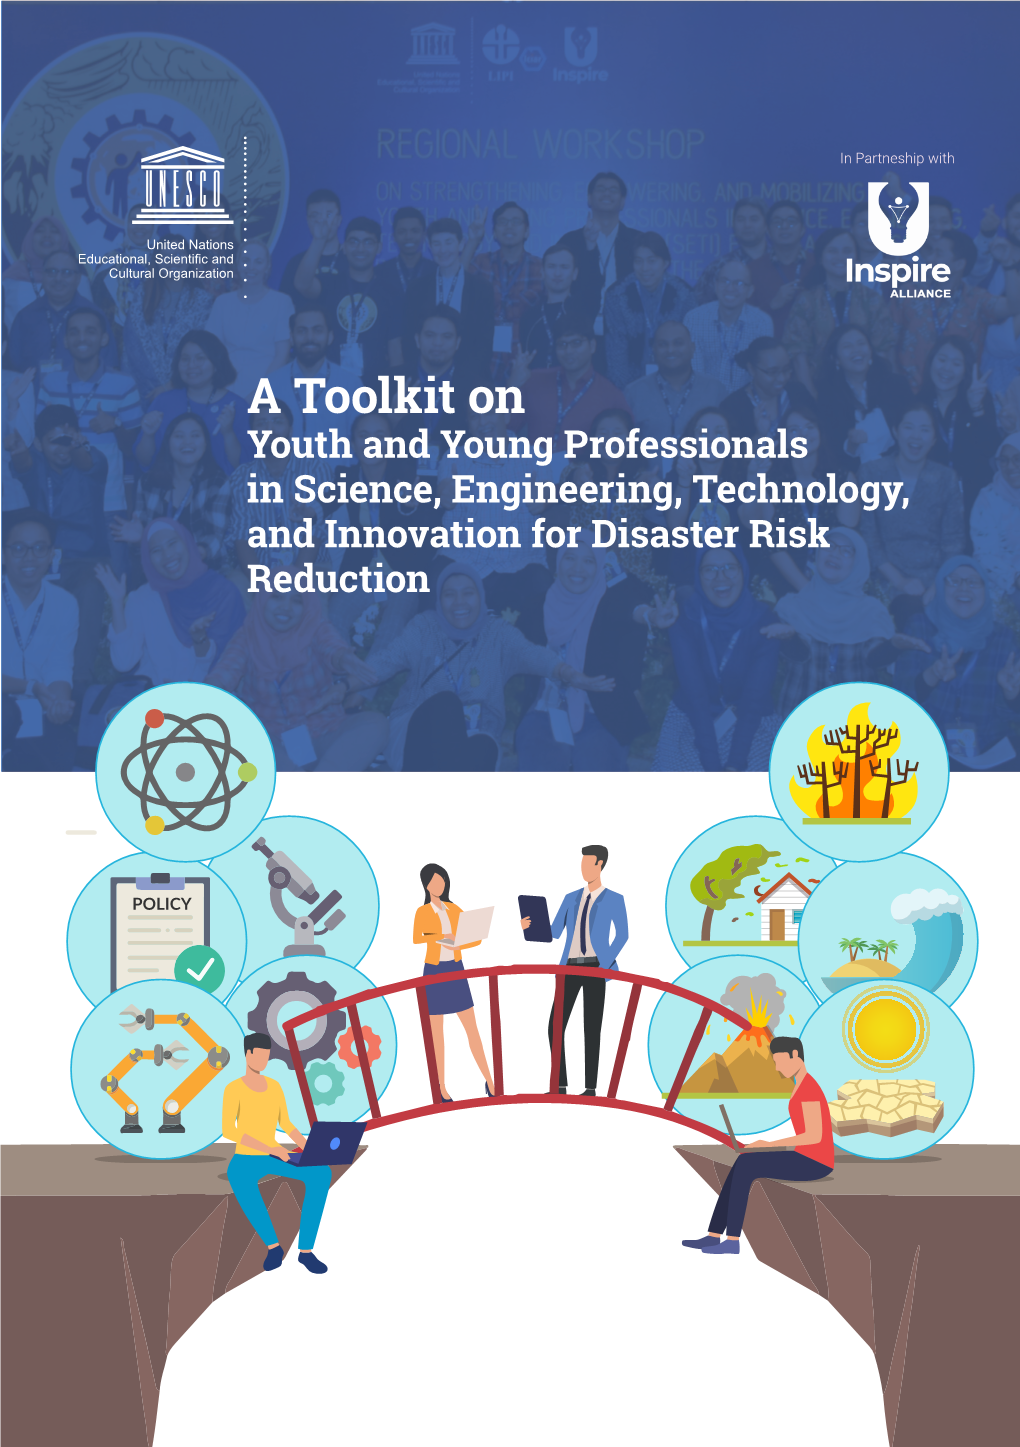 A Toolkit on Youth and Young Professionals in Science, Engineering, Technology, and Innovation for Disaster Risk Reduction